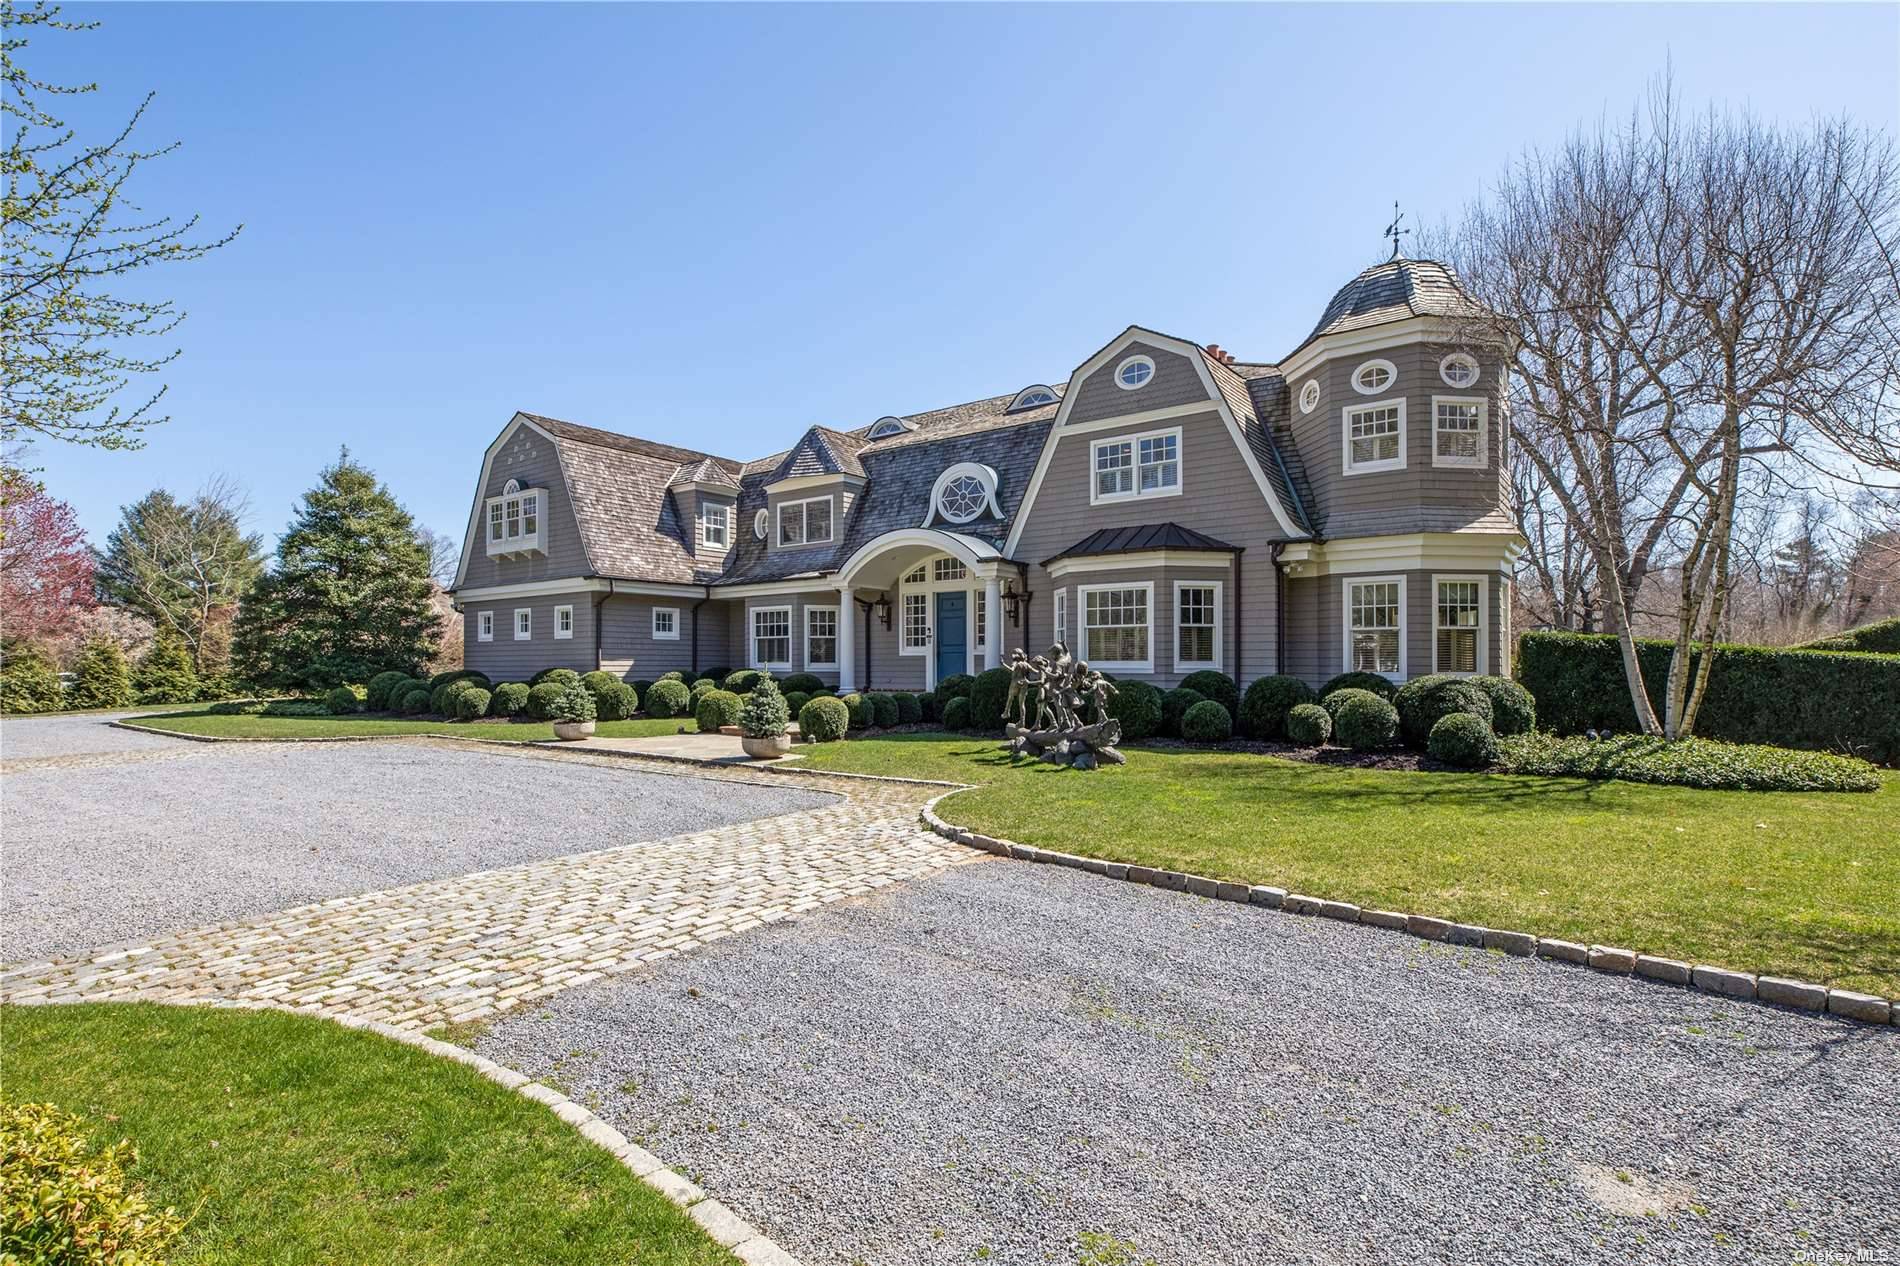 Set on 3 lush rolling acres, this prodigious Old Brookville estate boasts a distinguished address on the North Shores coveted White Gate Drive.